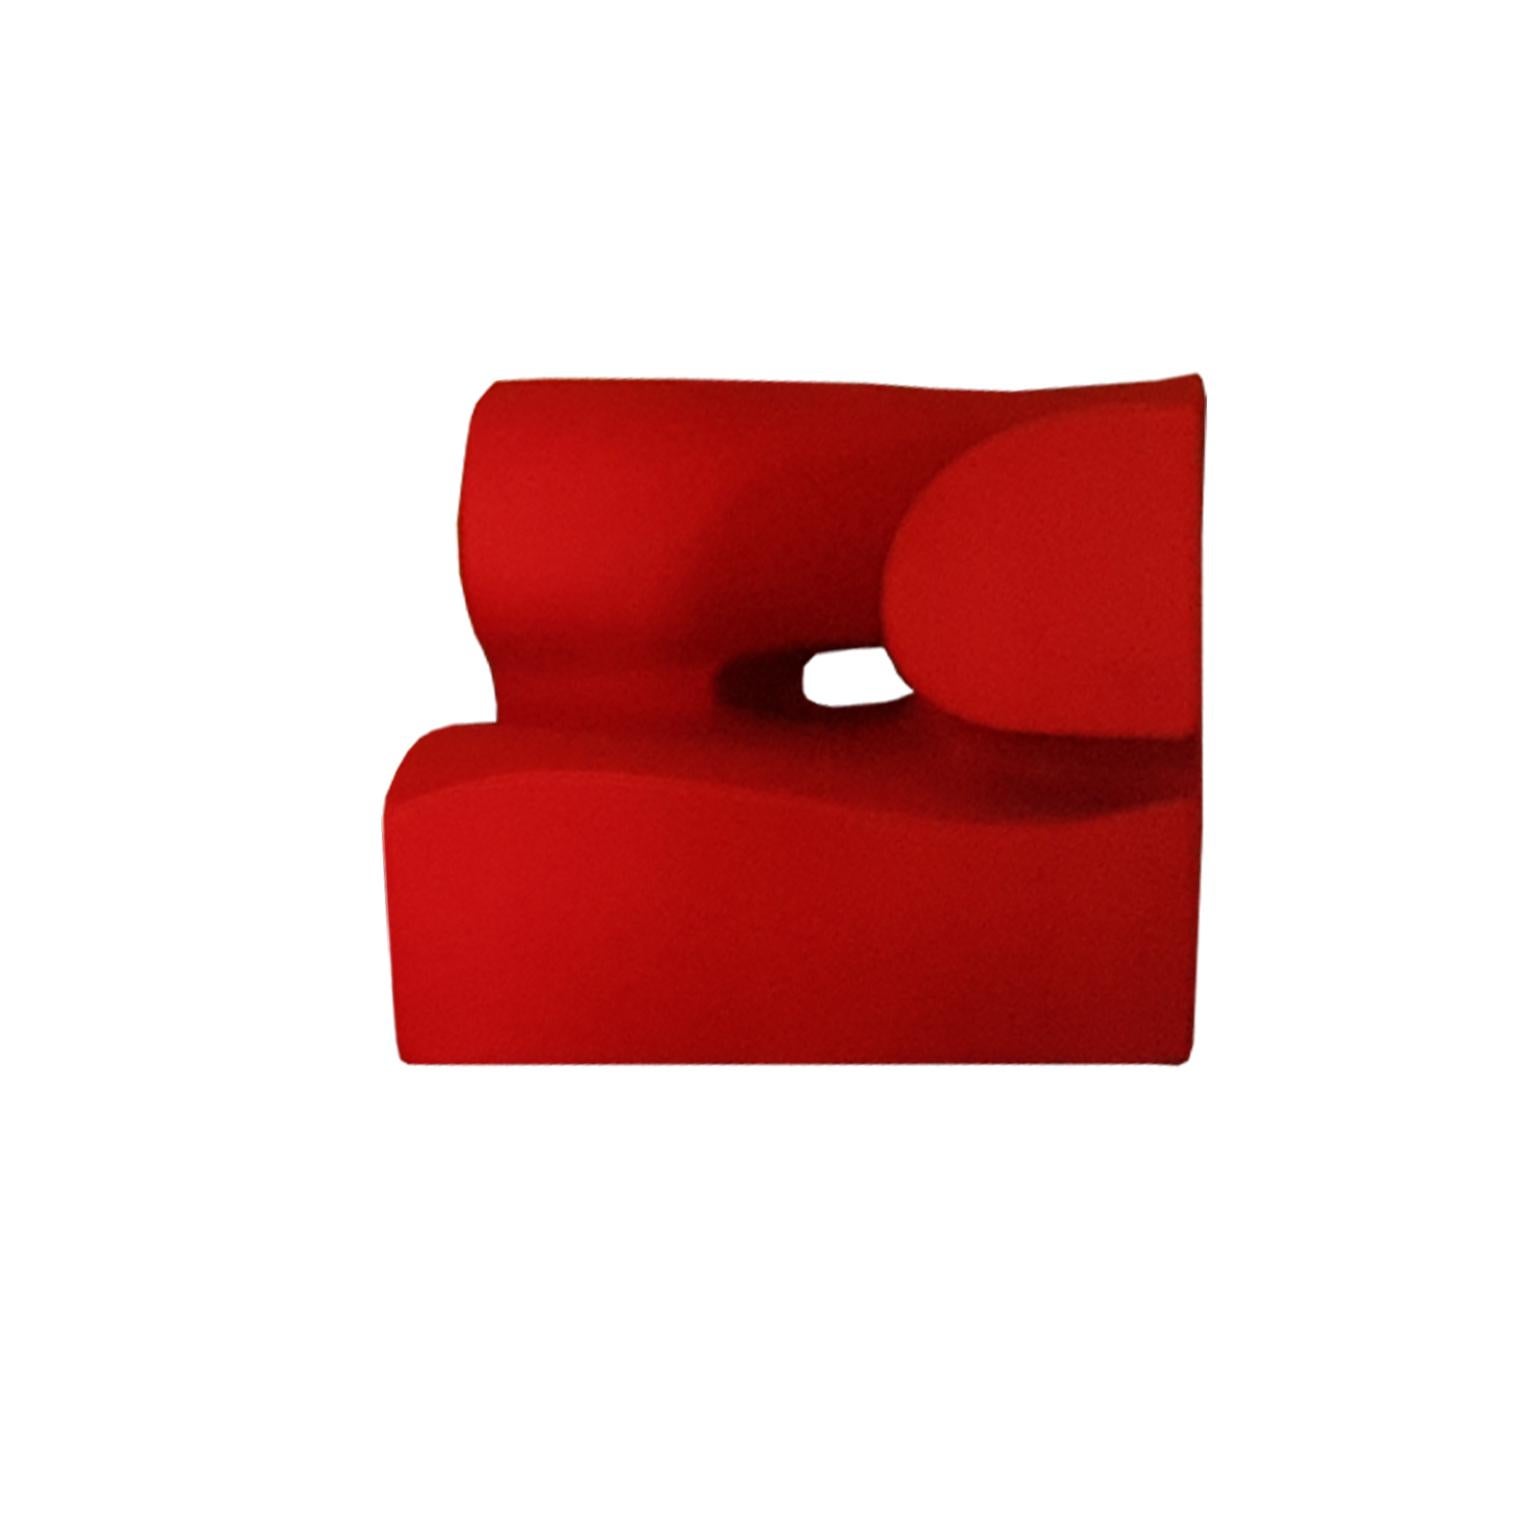 Contemporary Italian Moroso Modular Sofa with Red Wool Upholstery by Ron Arad For Sale 8